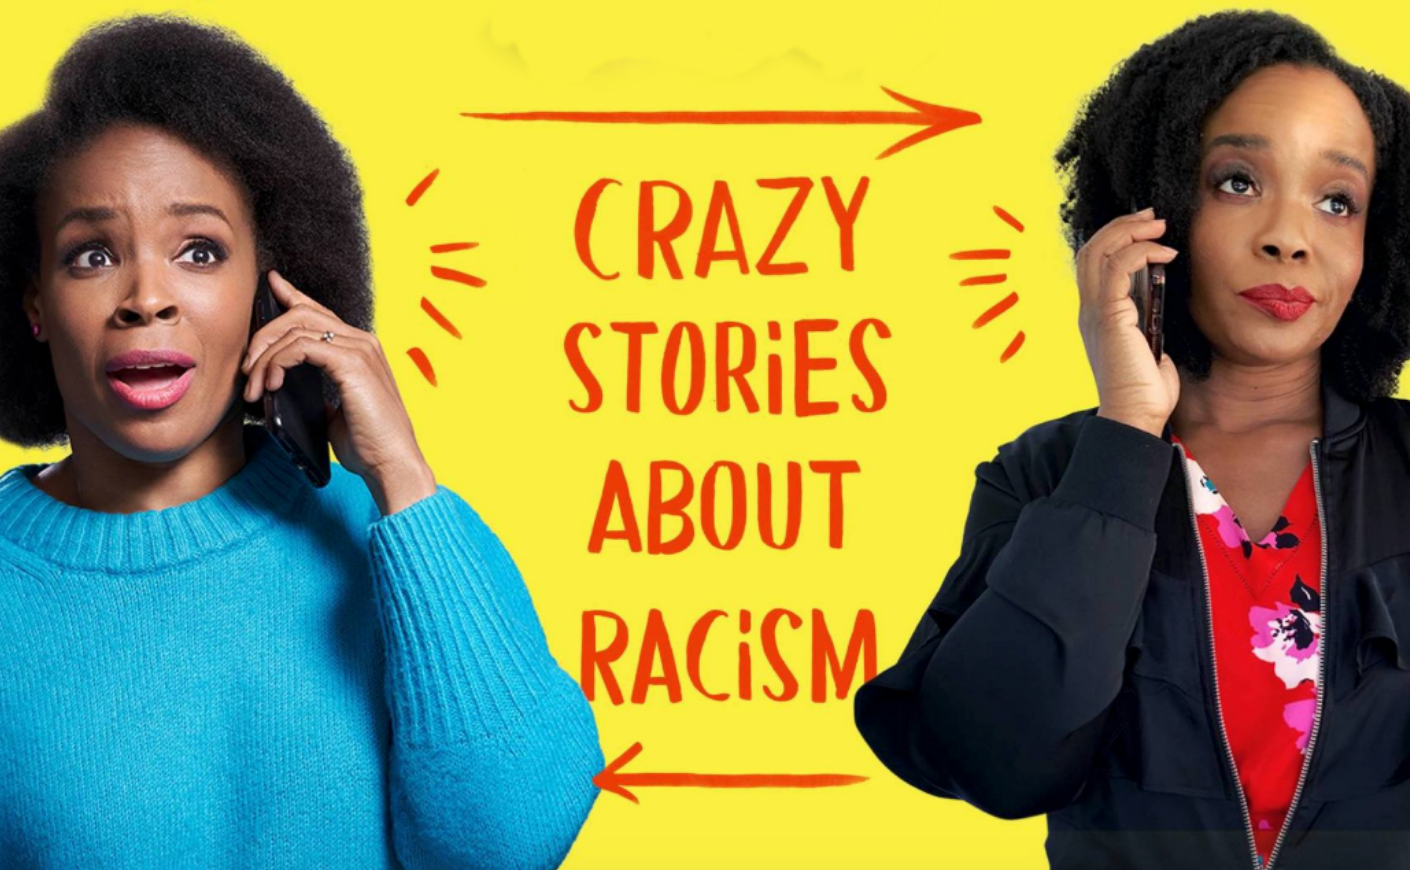 Comedian Amber Ruffin and Her Sister on Their New Book